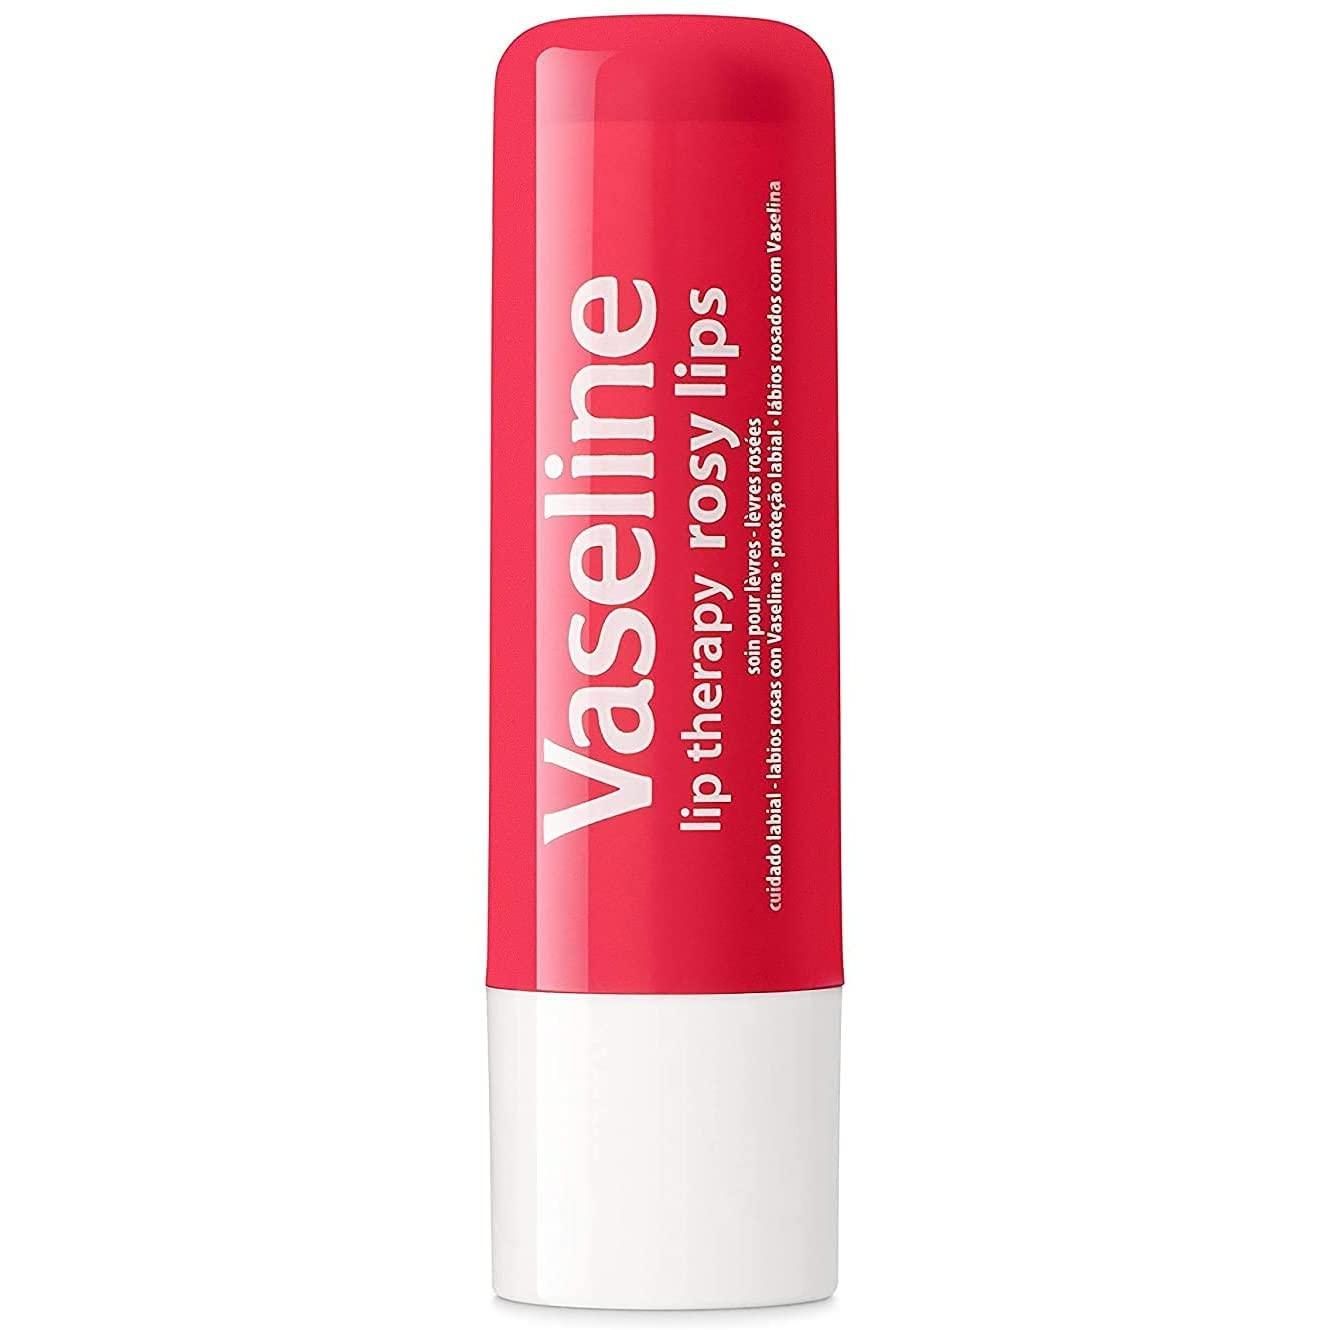 Waxelene -- a petroleum-free alternative for dry lips, elbows and feet.  YAY!